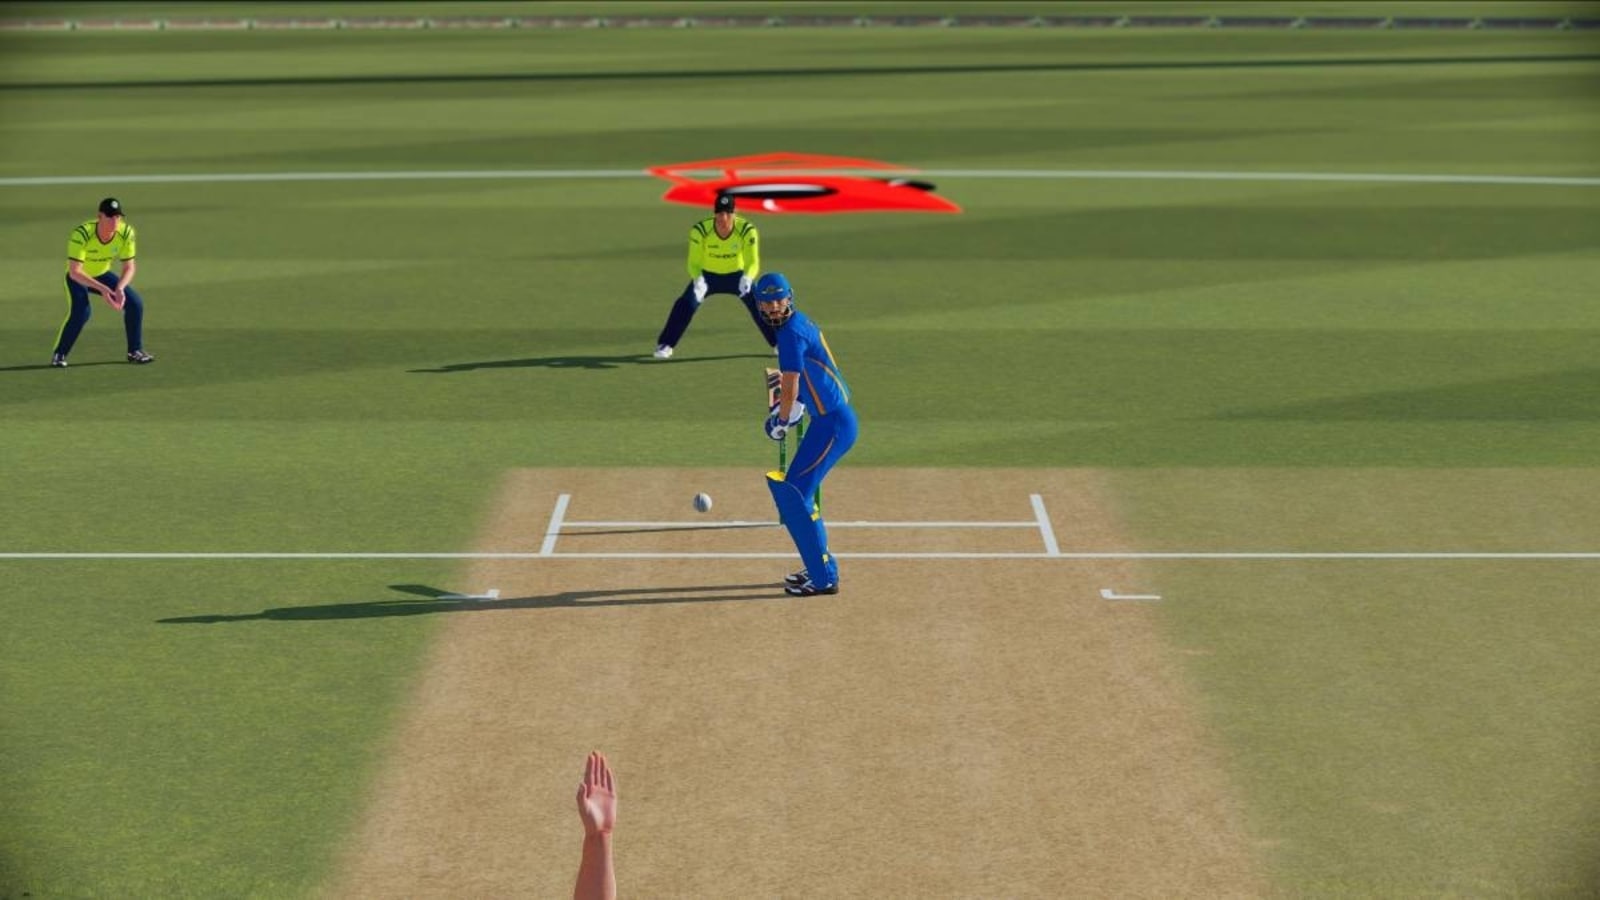 download cricket games for pc